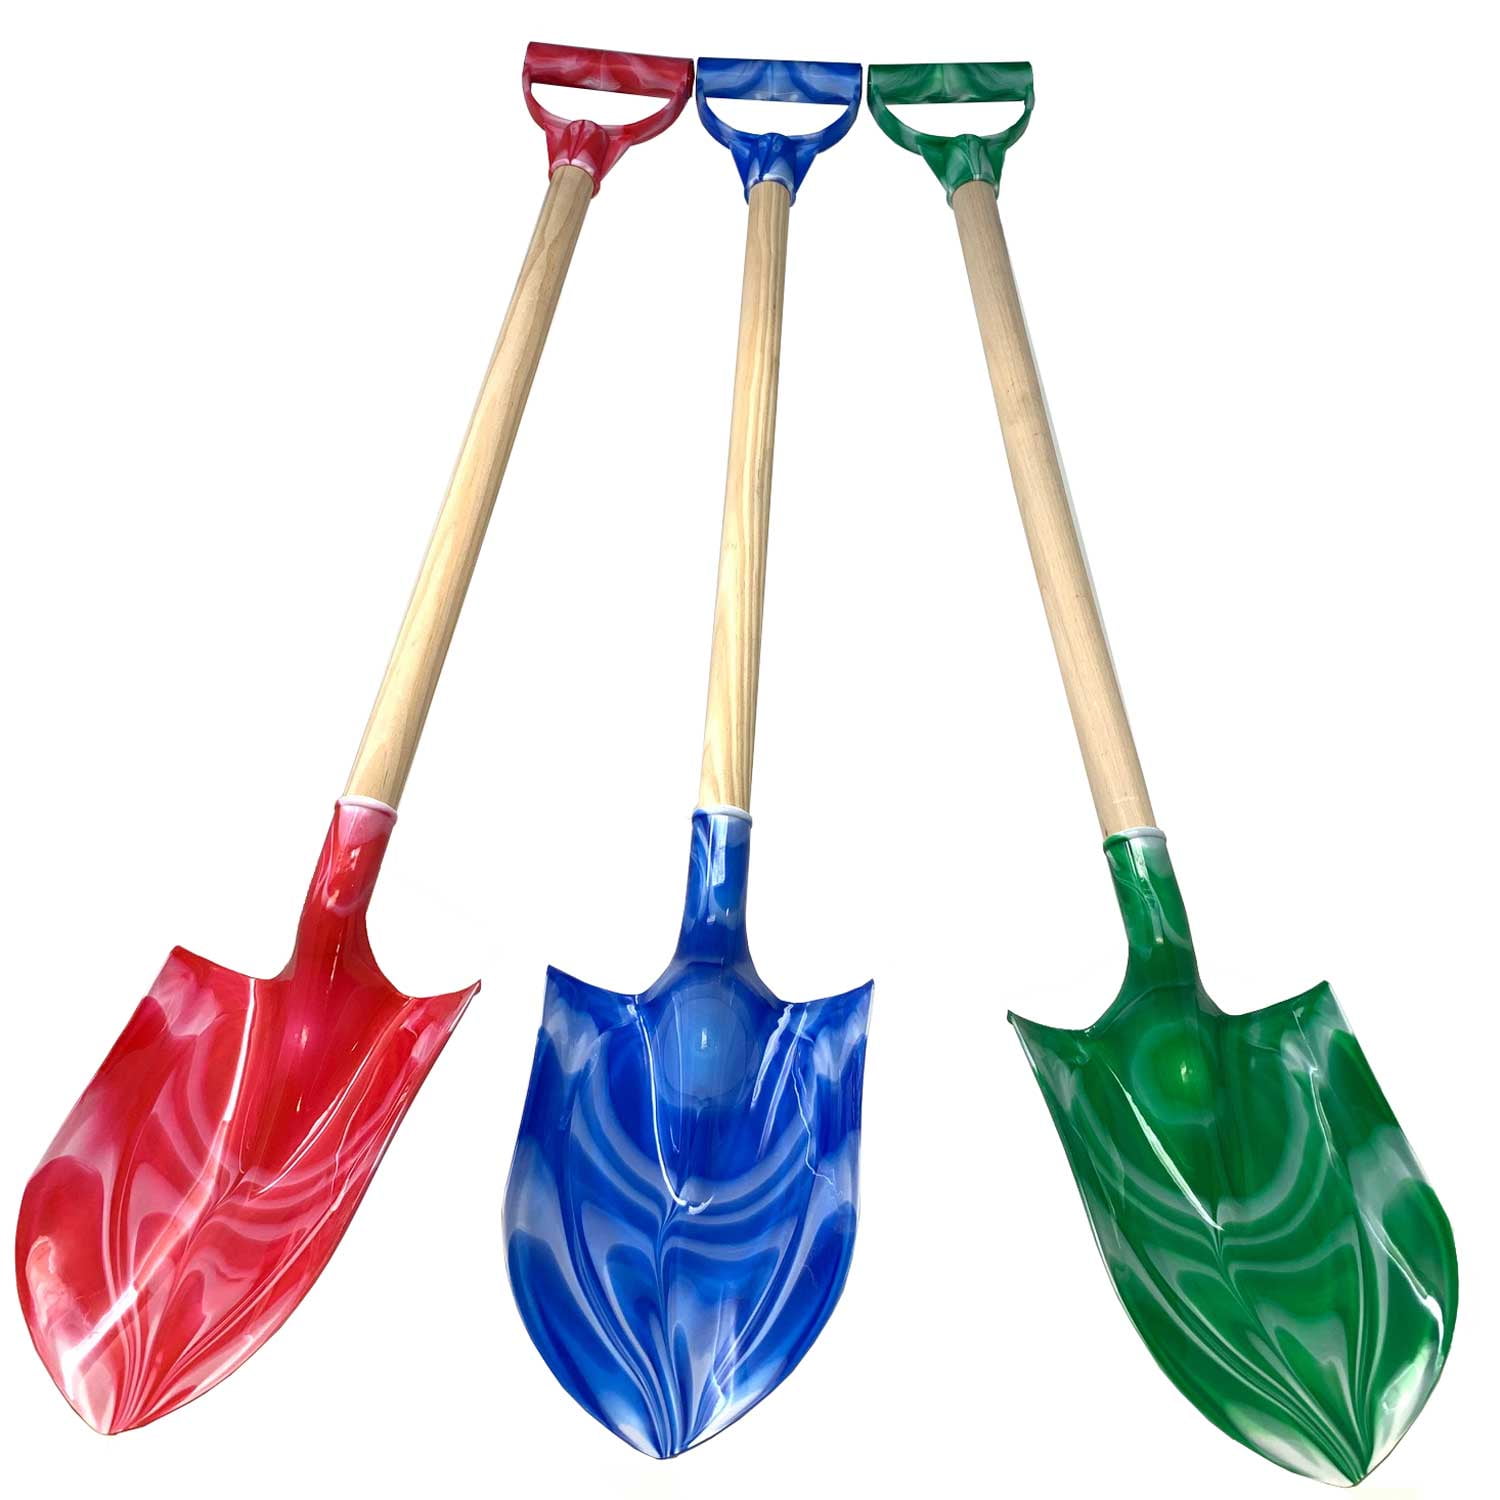 31" Heavy Duty Wooden Kids Sand Shovels with Plastic Spade & Handle 5 Pack 